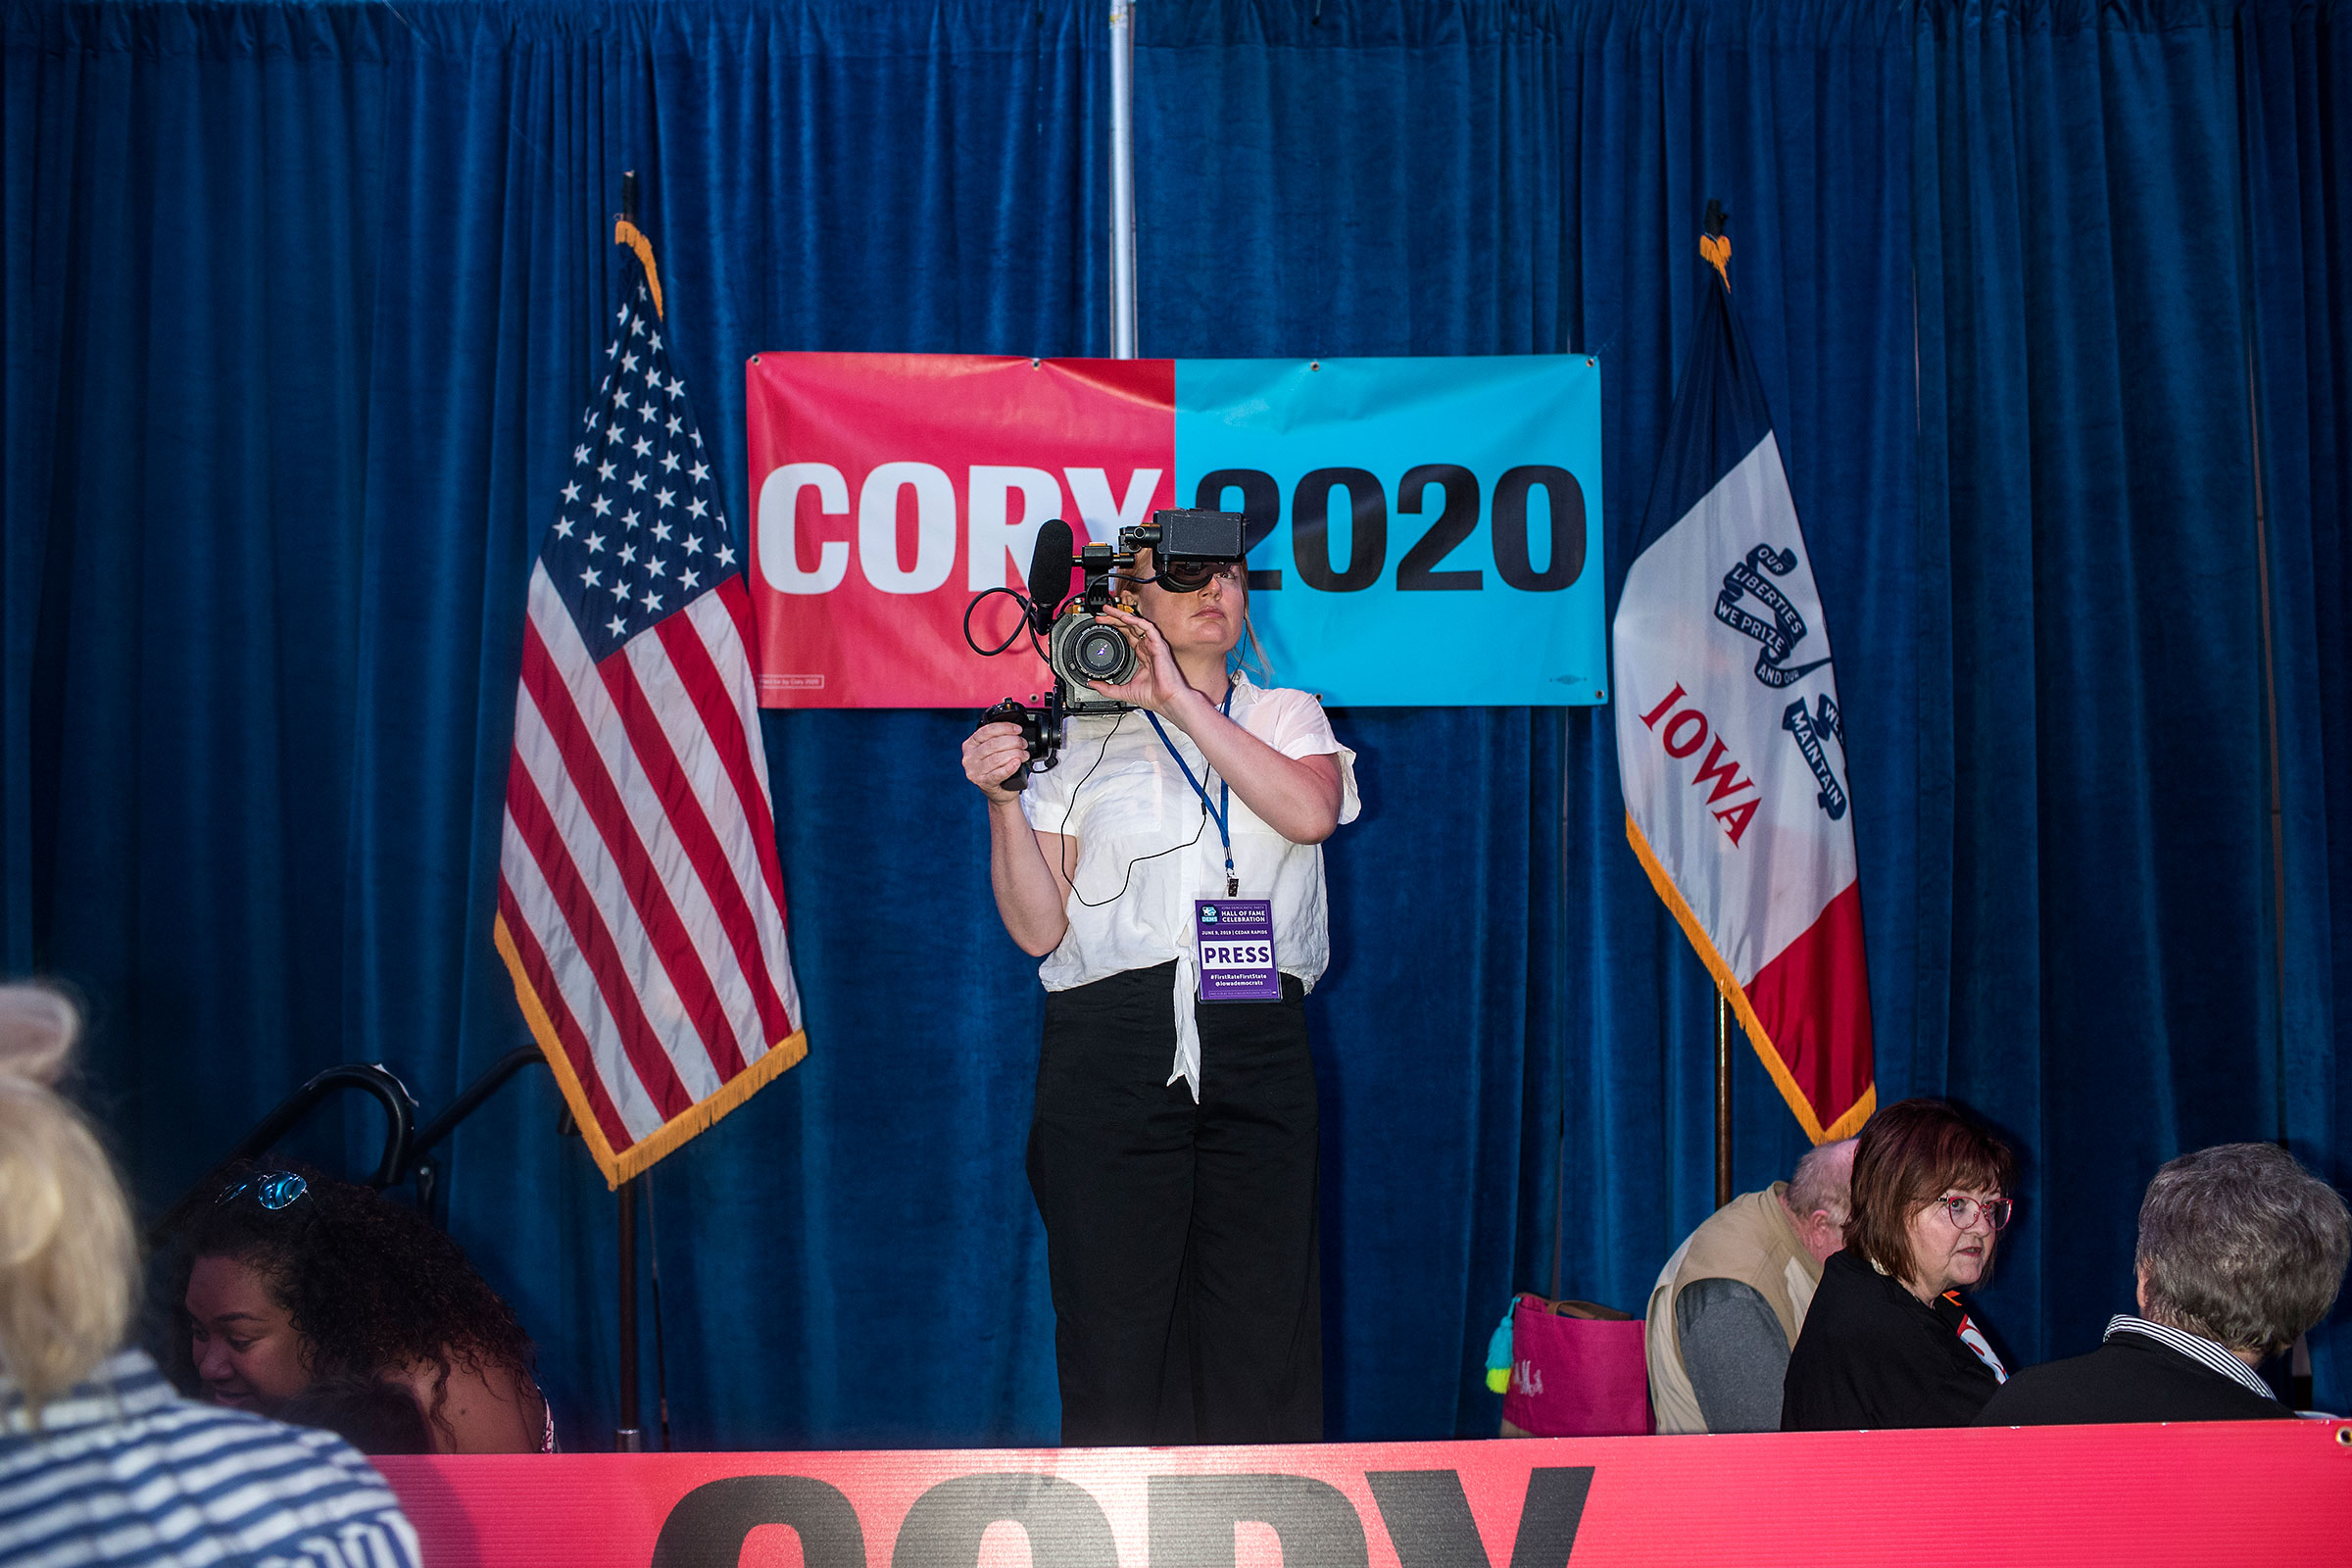 A journalist records video before remarks by Senator Cory Booker in the Grand Ballroom of the Double Tree Cedar Rapids Convention Complex during the Democratic Hall of Fame event in Cedar Rapids, Iowa on June 9. (Danny Wilcox Frazier—VII for TIME)